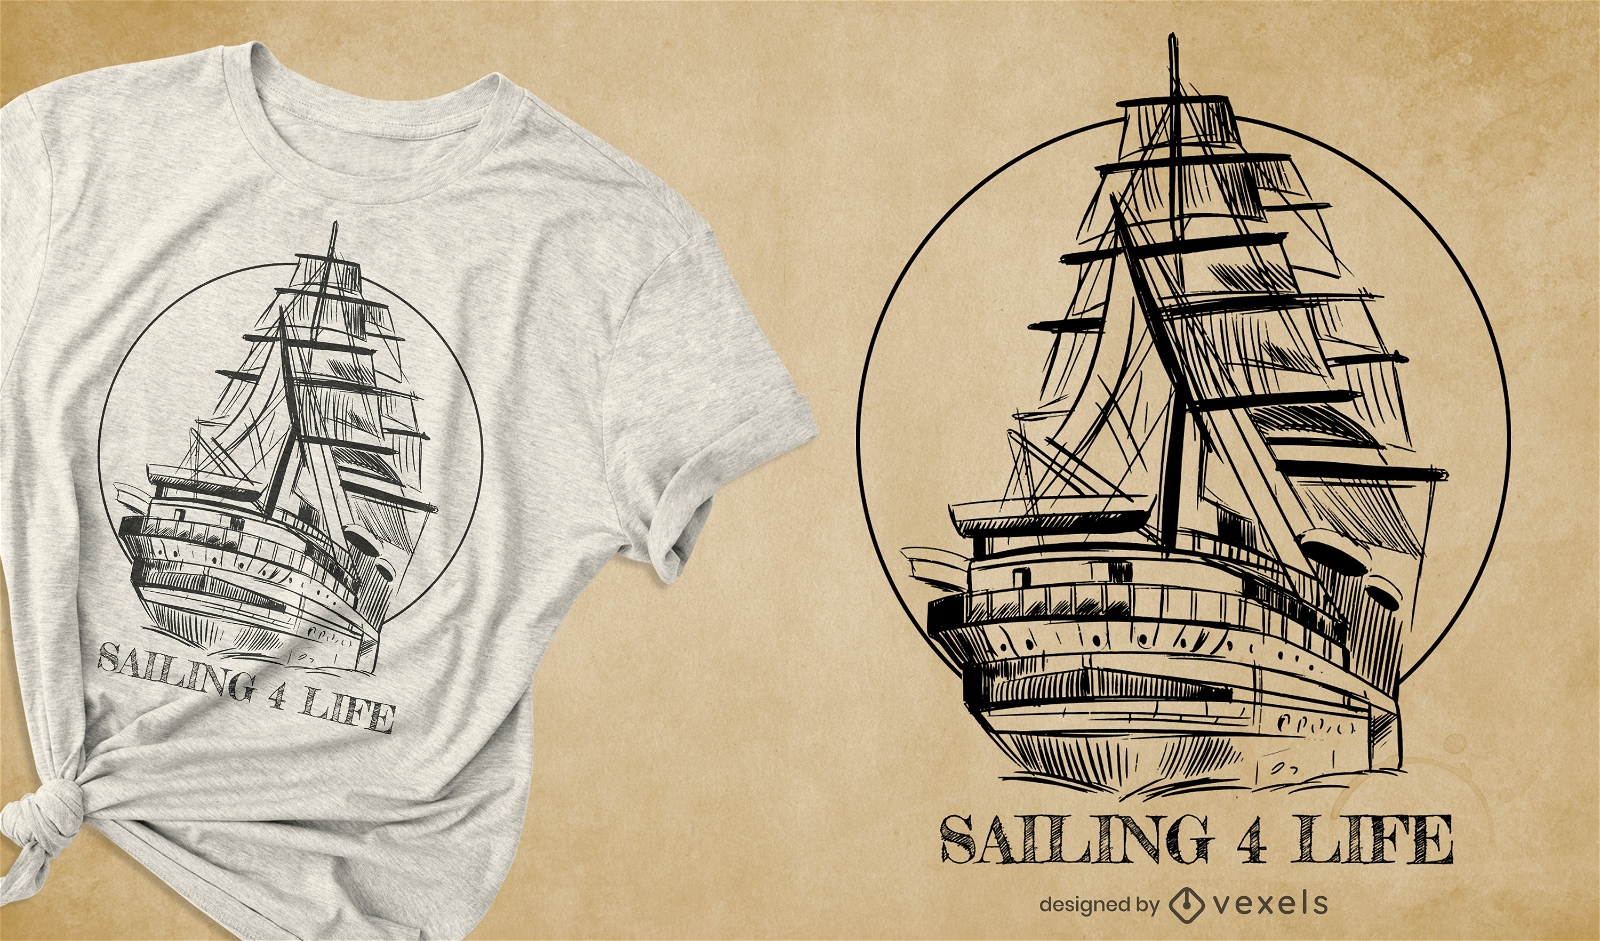 https://images.vexels.com/content/264915/preview/hand-drawn-sailboat-t-shirt-design-aedf31.png